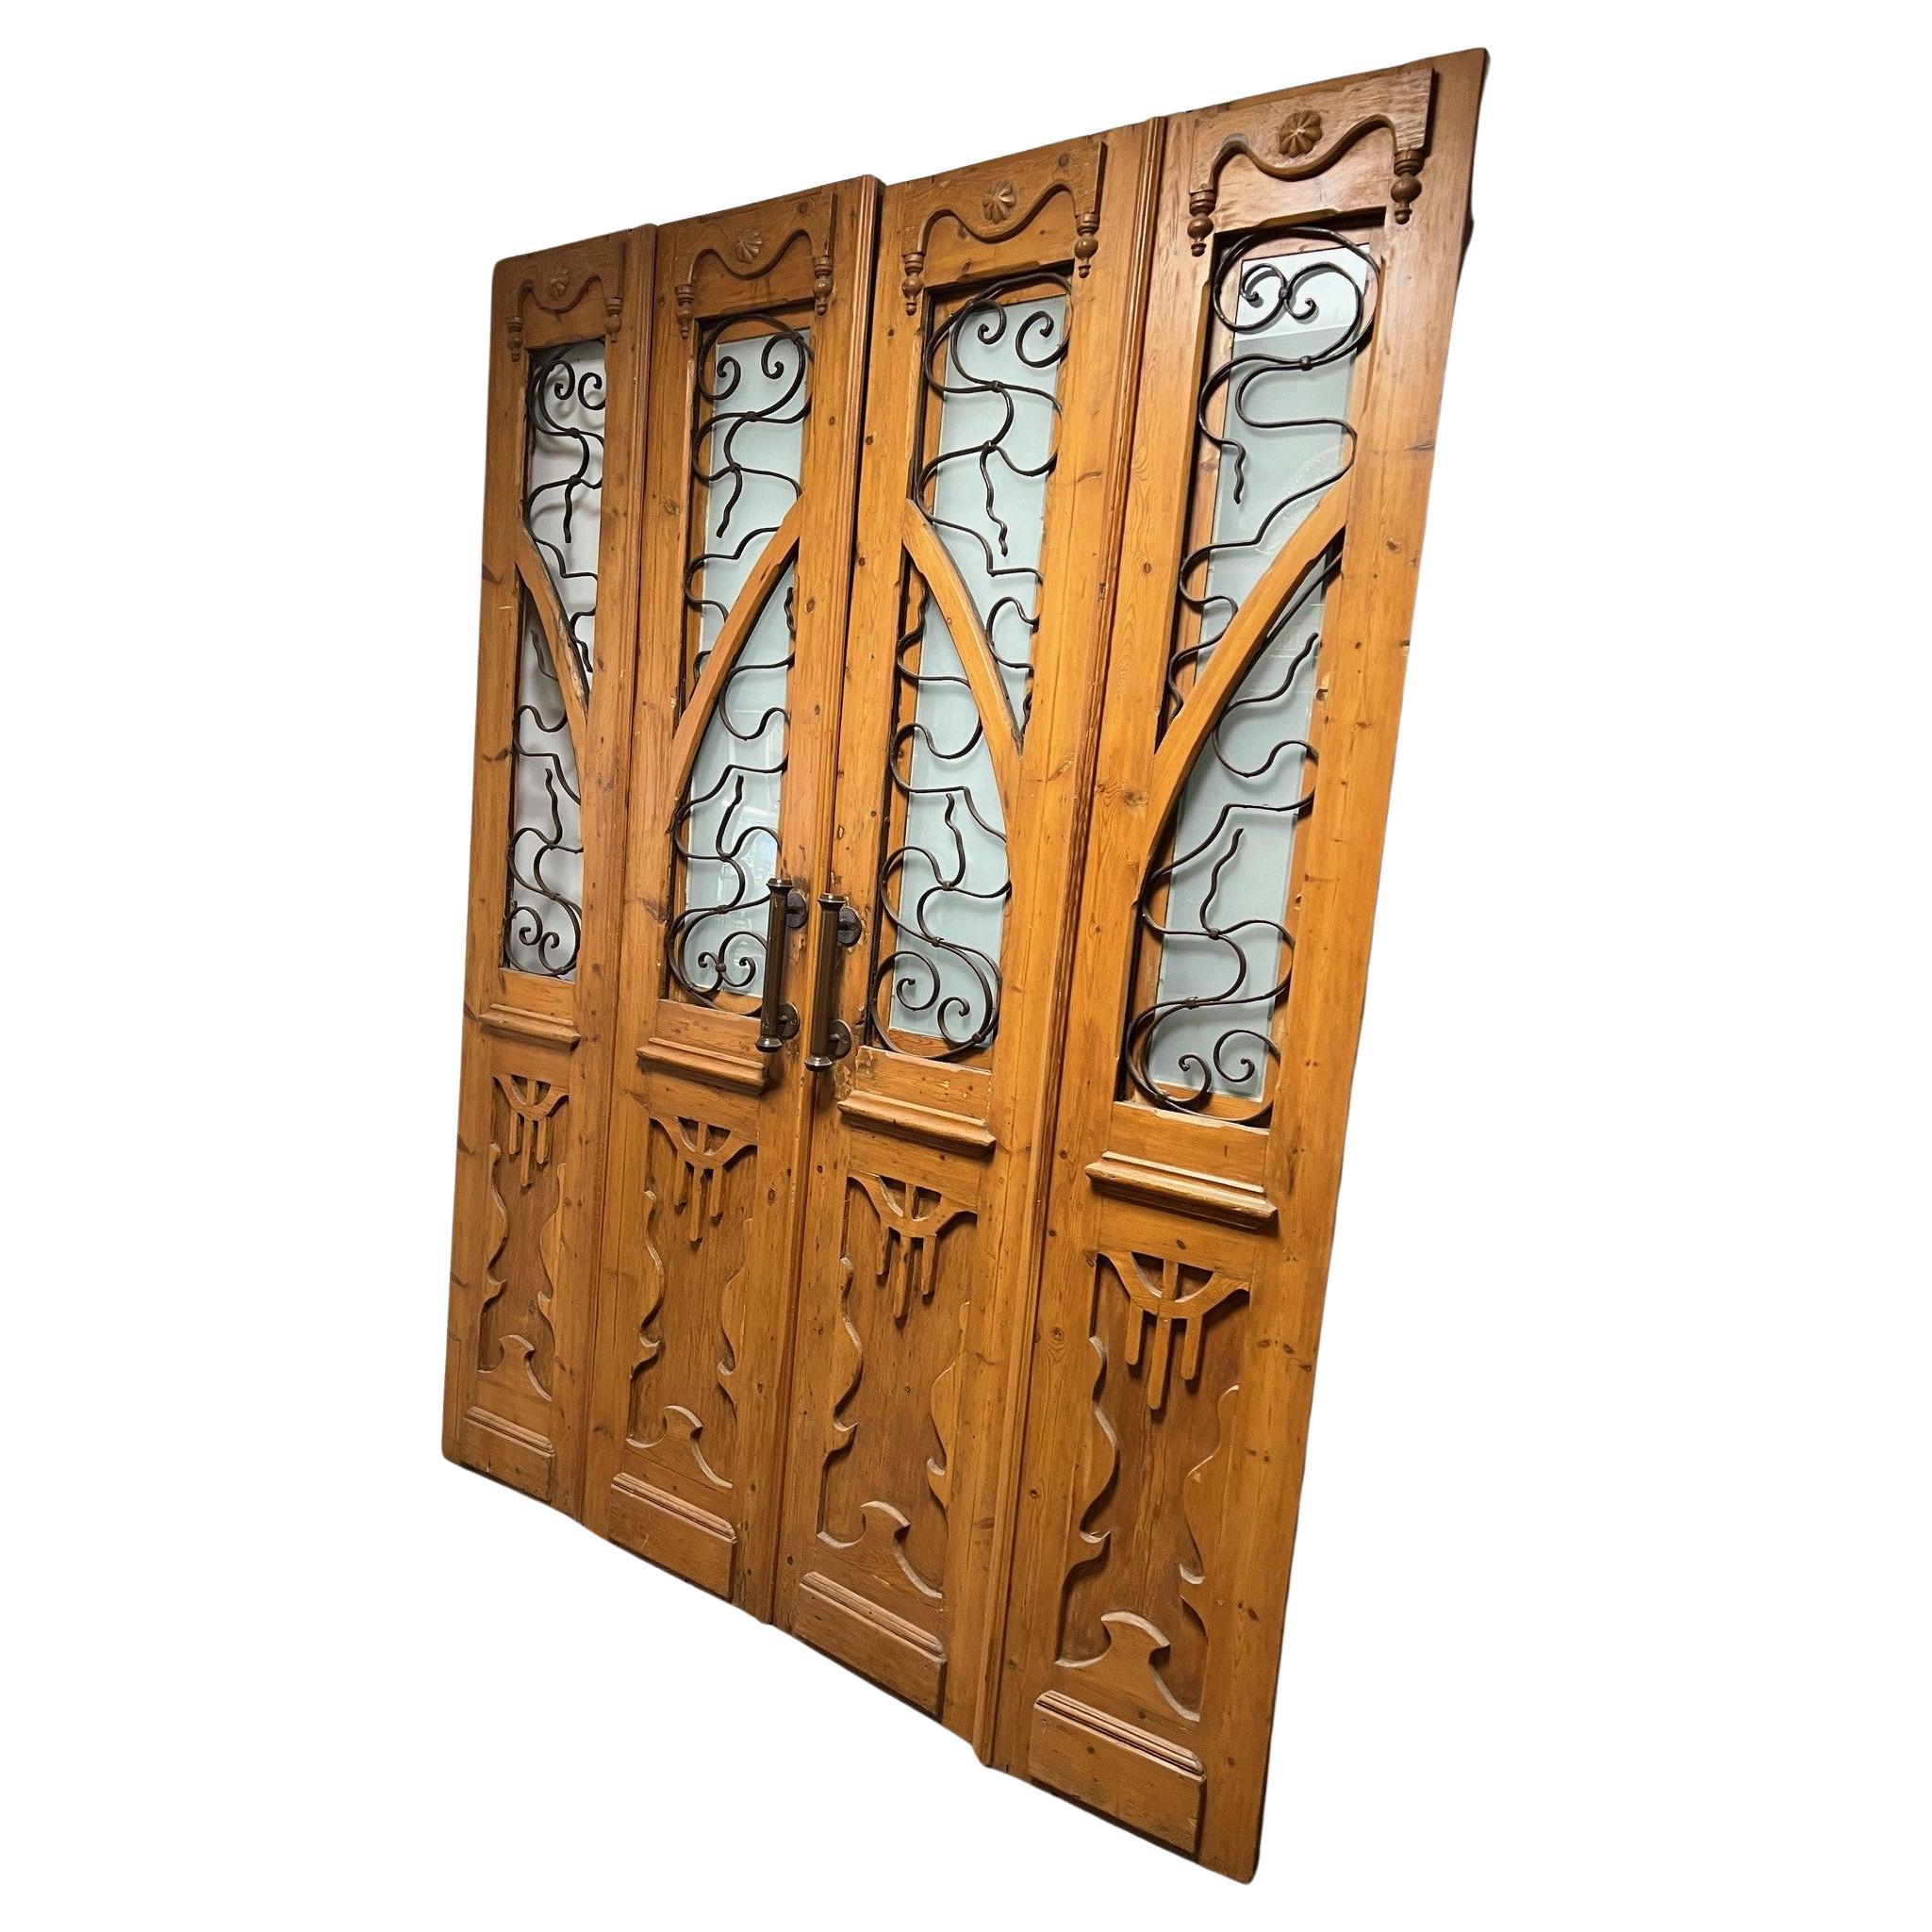 Early 20th Century Antique Set of Four Doors Wood with Iron Panels.